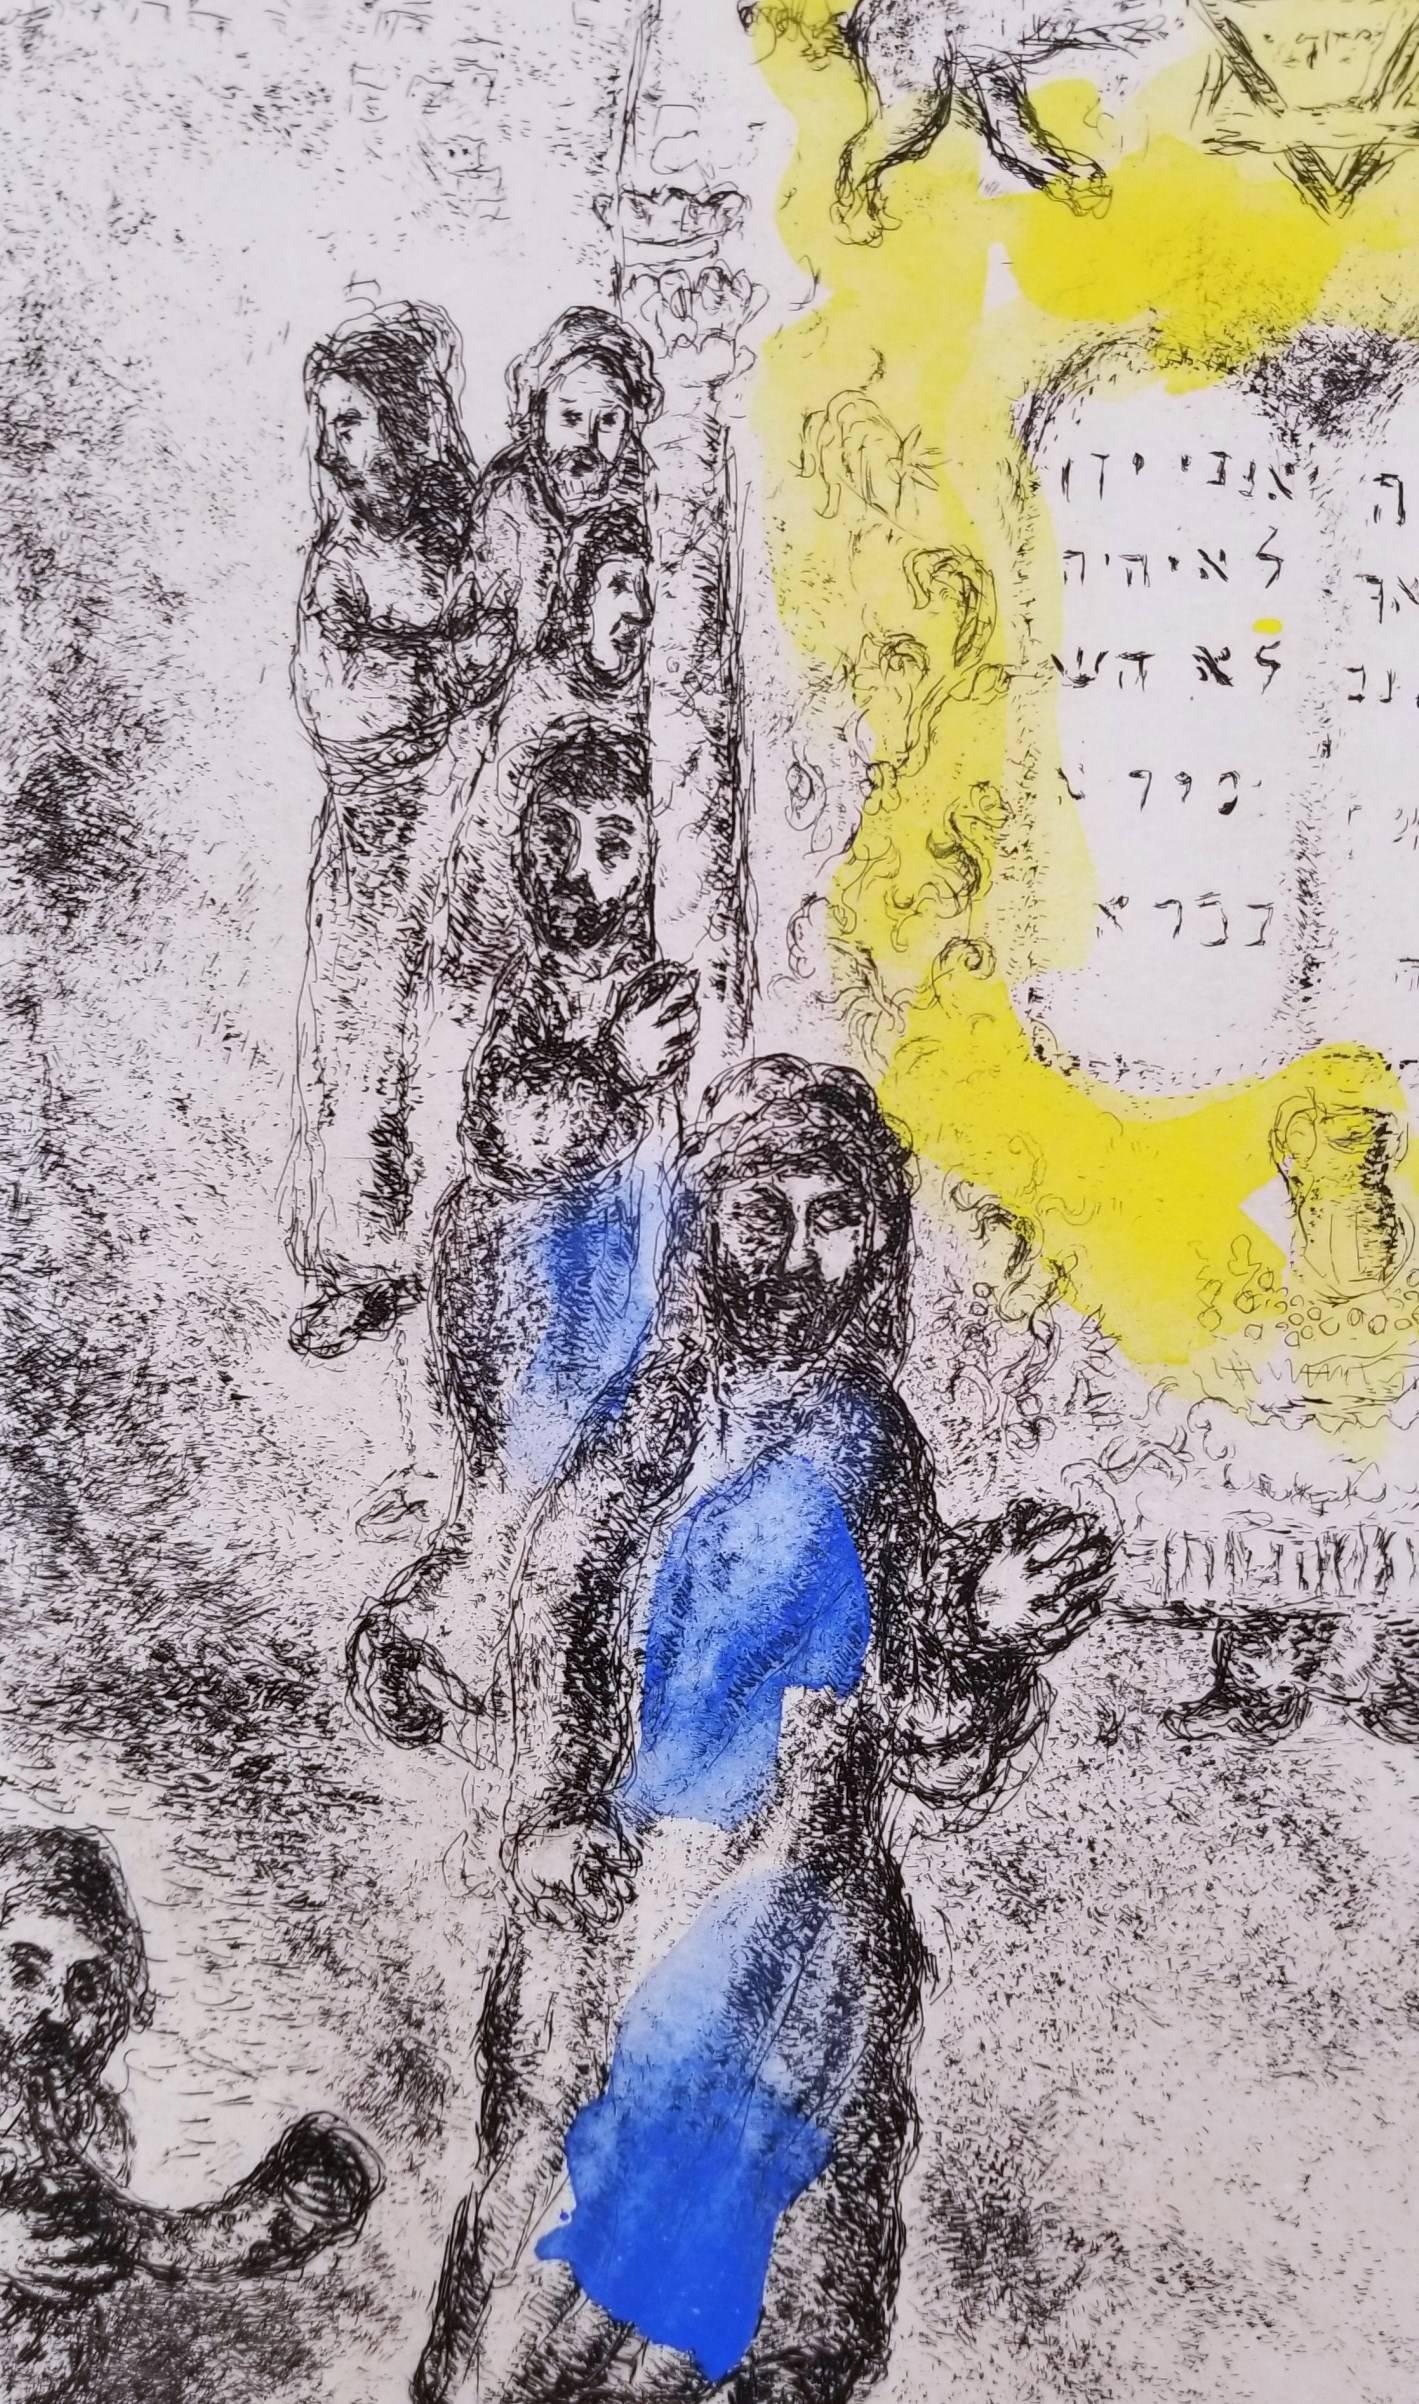 An original signed hand colored etching by Russian-French artist Marc Chagall (1887-1985) titled "Passage du Jordain (The Israelites Cross the Jordan)", 1956. Hand pencil signed by Chagall lower right and numbered lower left. Comes from